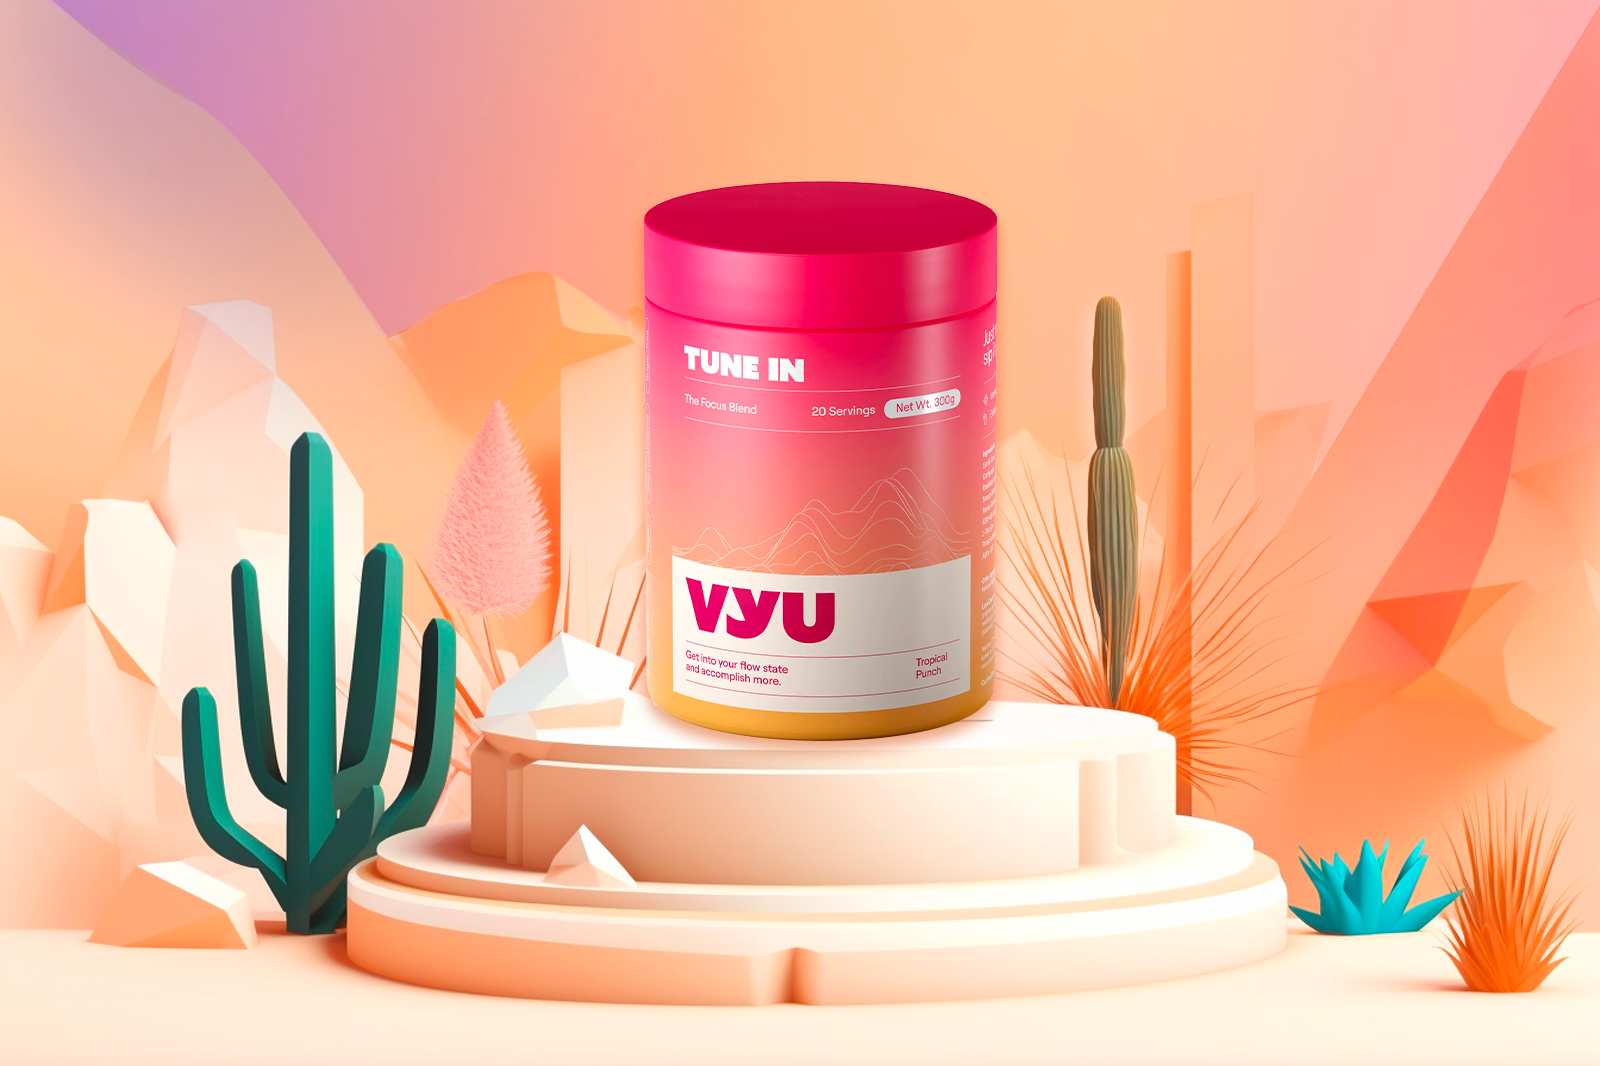 A container of VYU TUNE IN with Tropical Punch flavor is placed against a desert backdrop